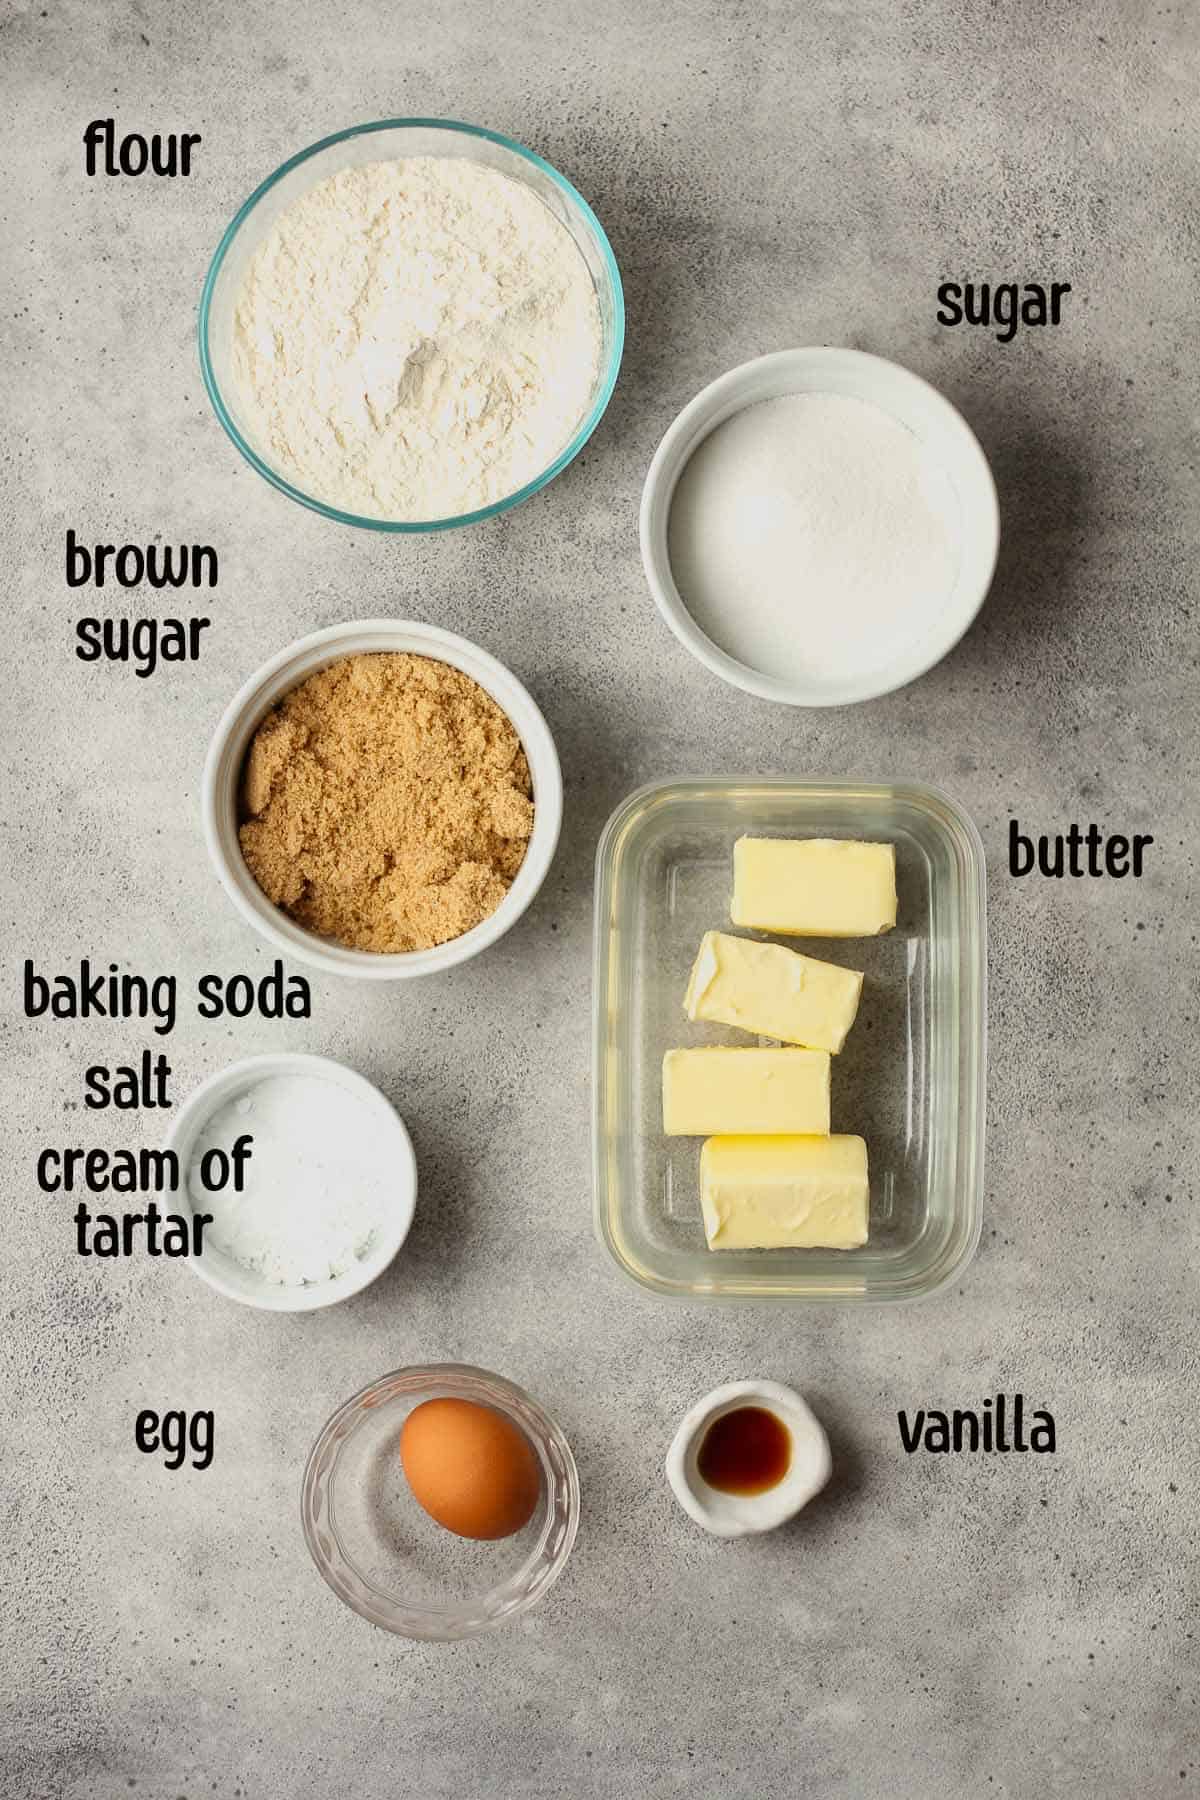 The ingredients for the cookies.